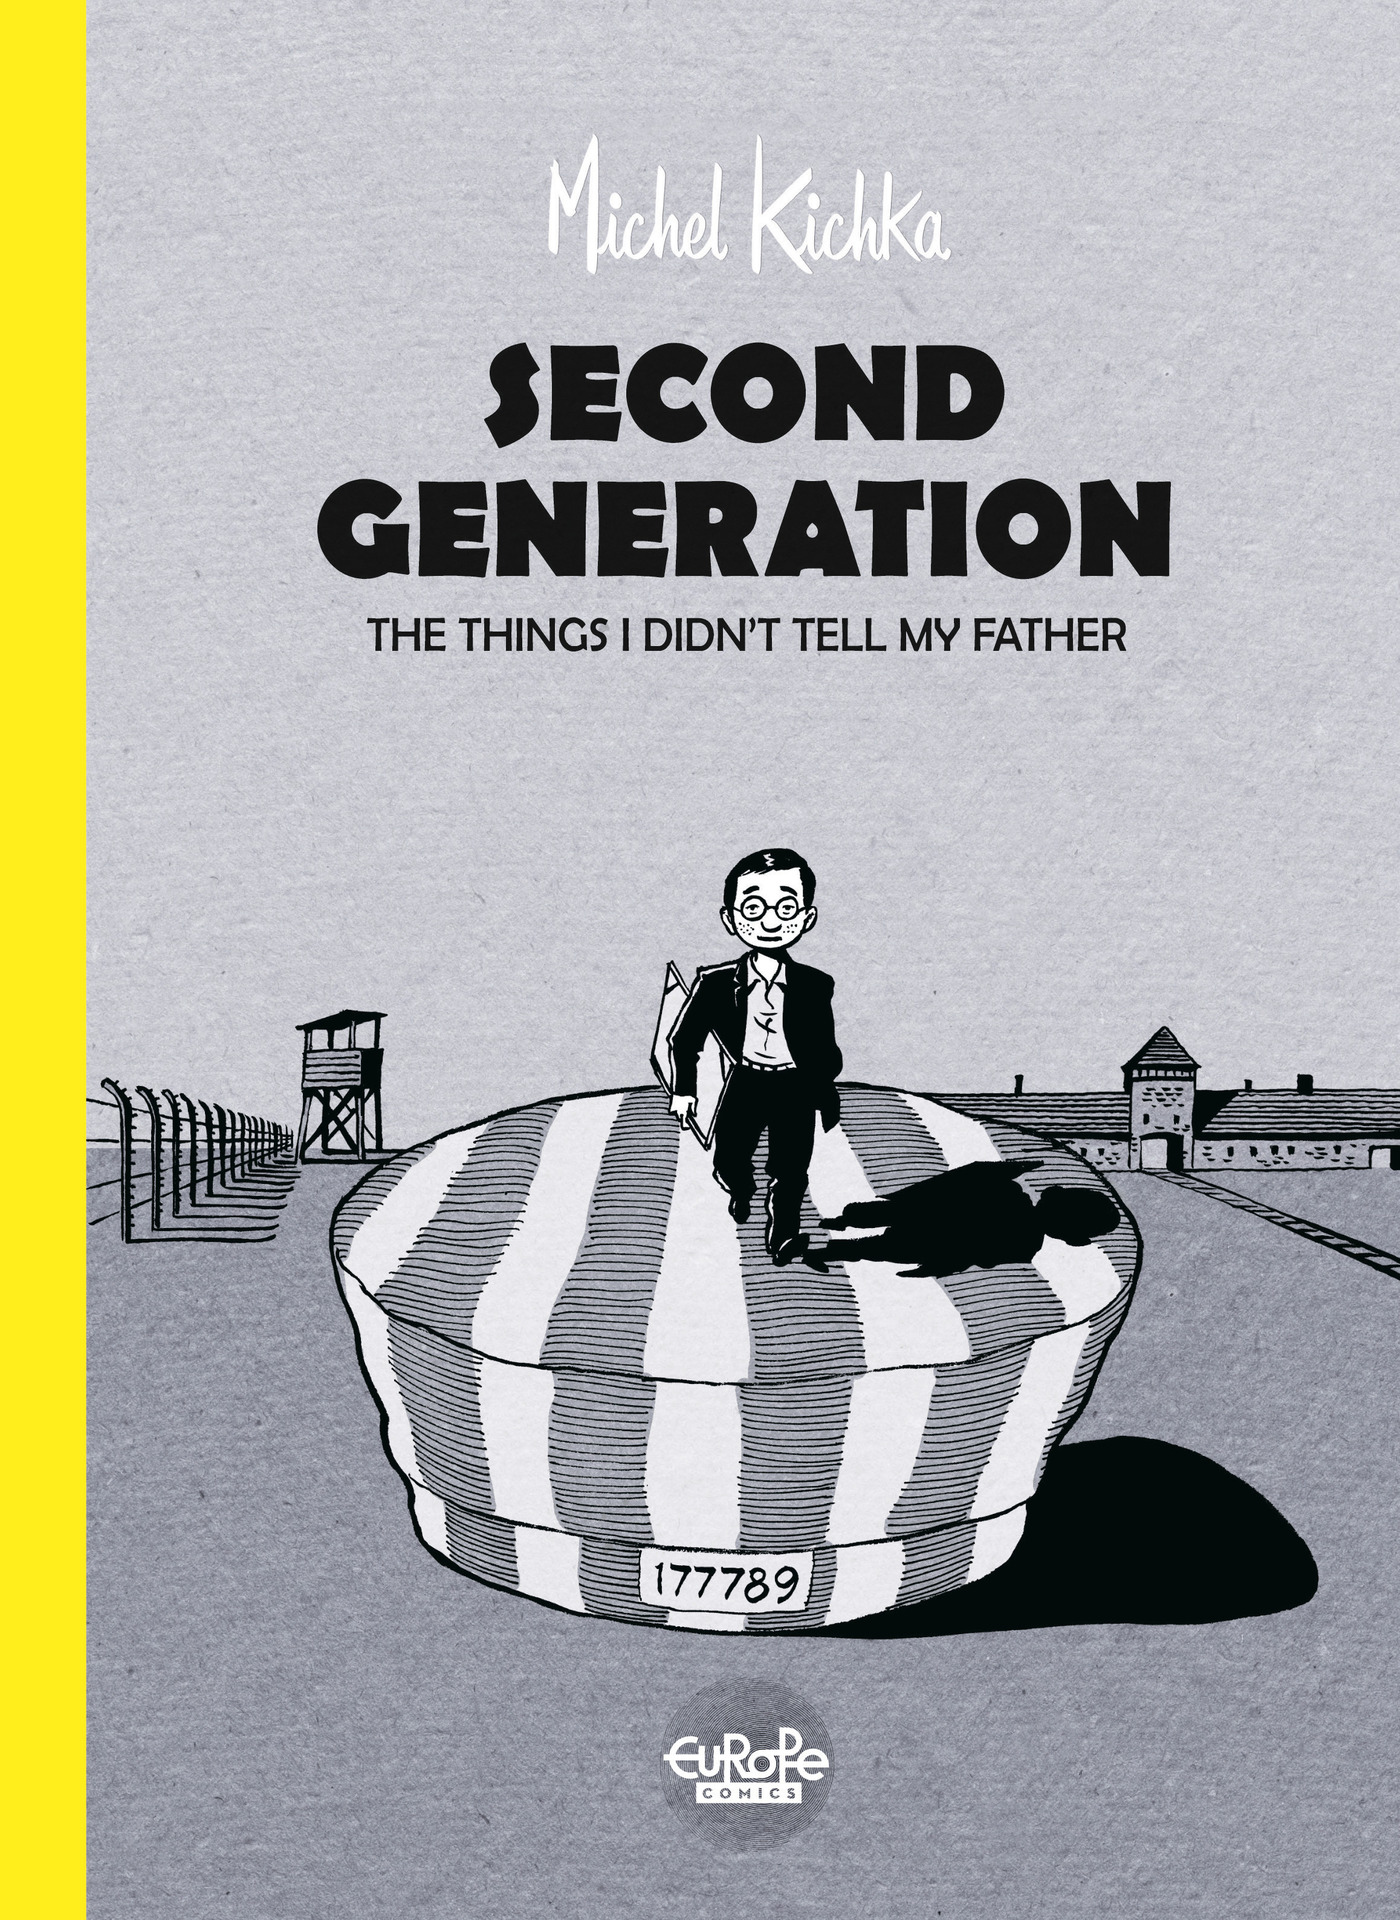 Read online Second Generation - The Things I Didn't Tell My Father comic -  Issue # Full - 1